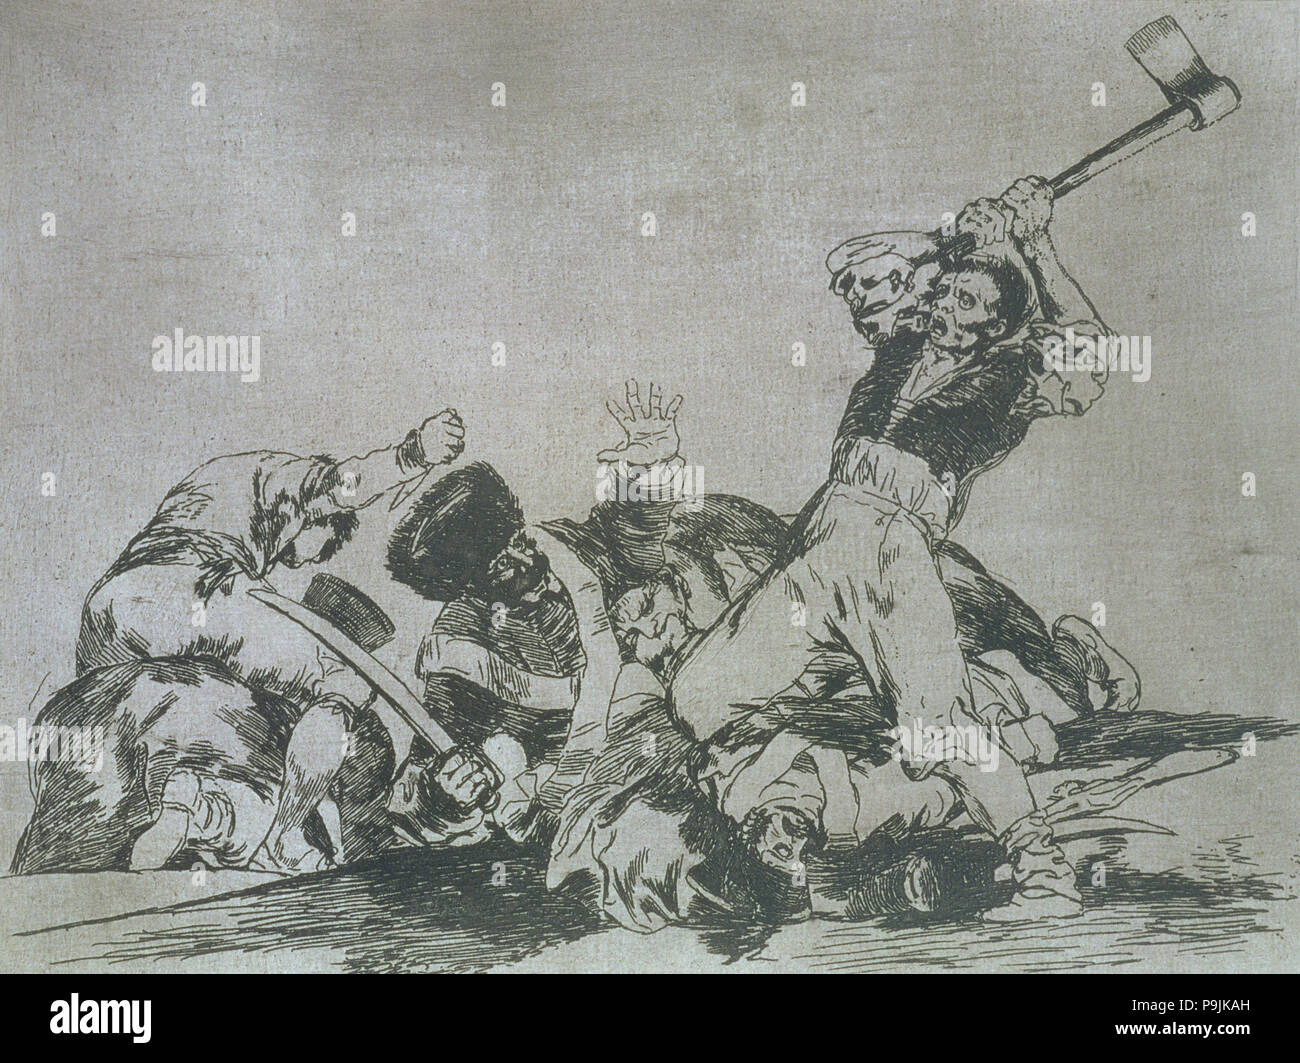 The Disasters of War, a series of etchings by Francisco de Goya (1746-1828), plate 3: 'Lo mismo' … Stock Photo